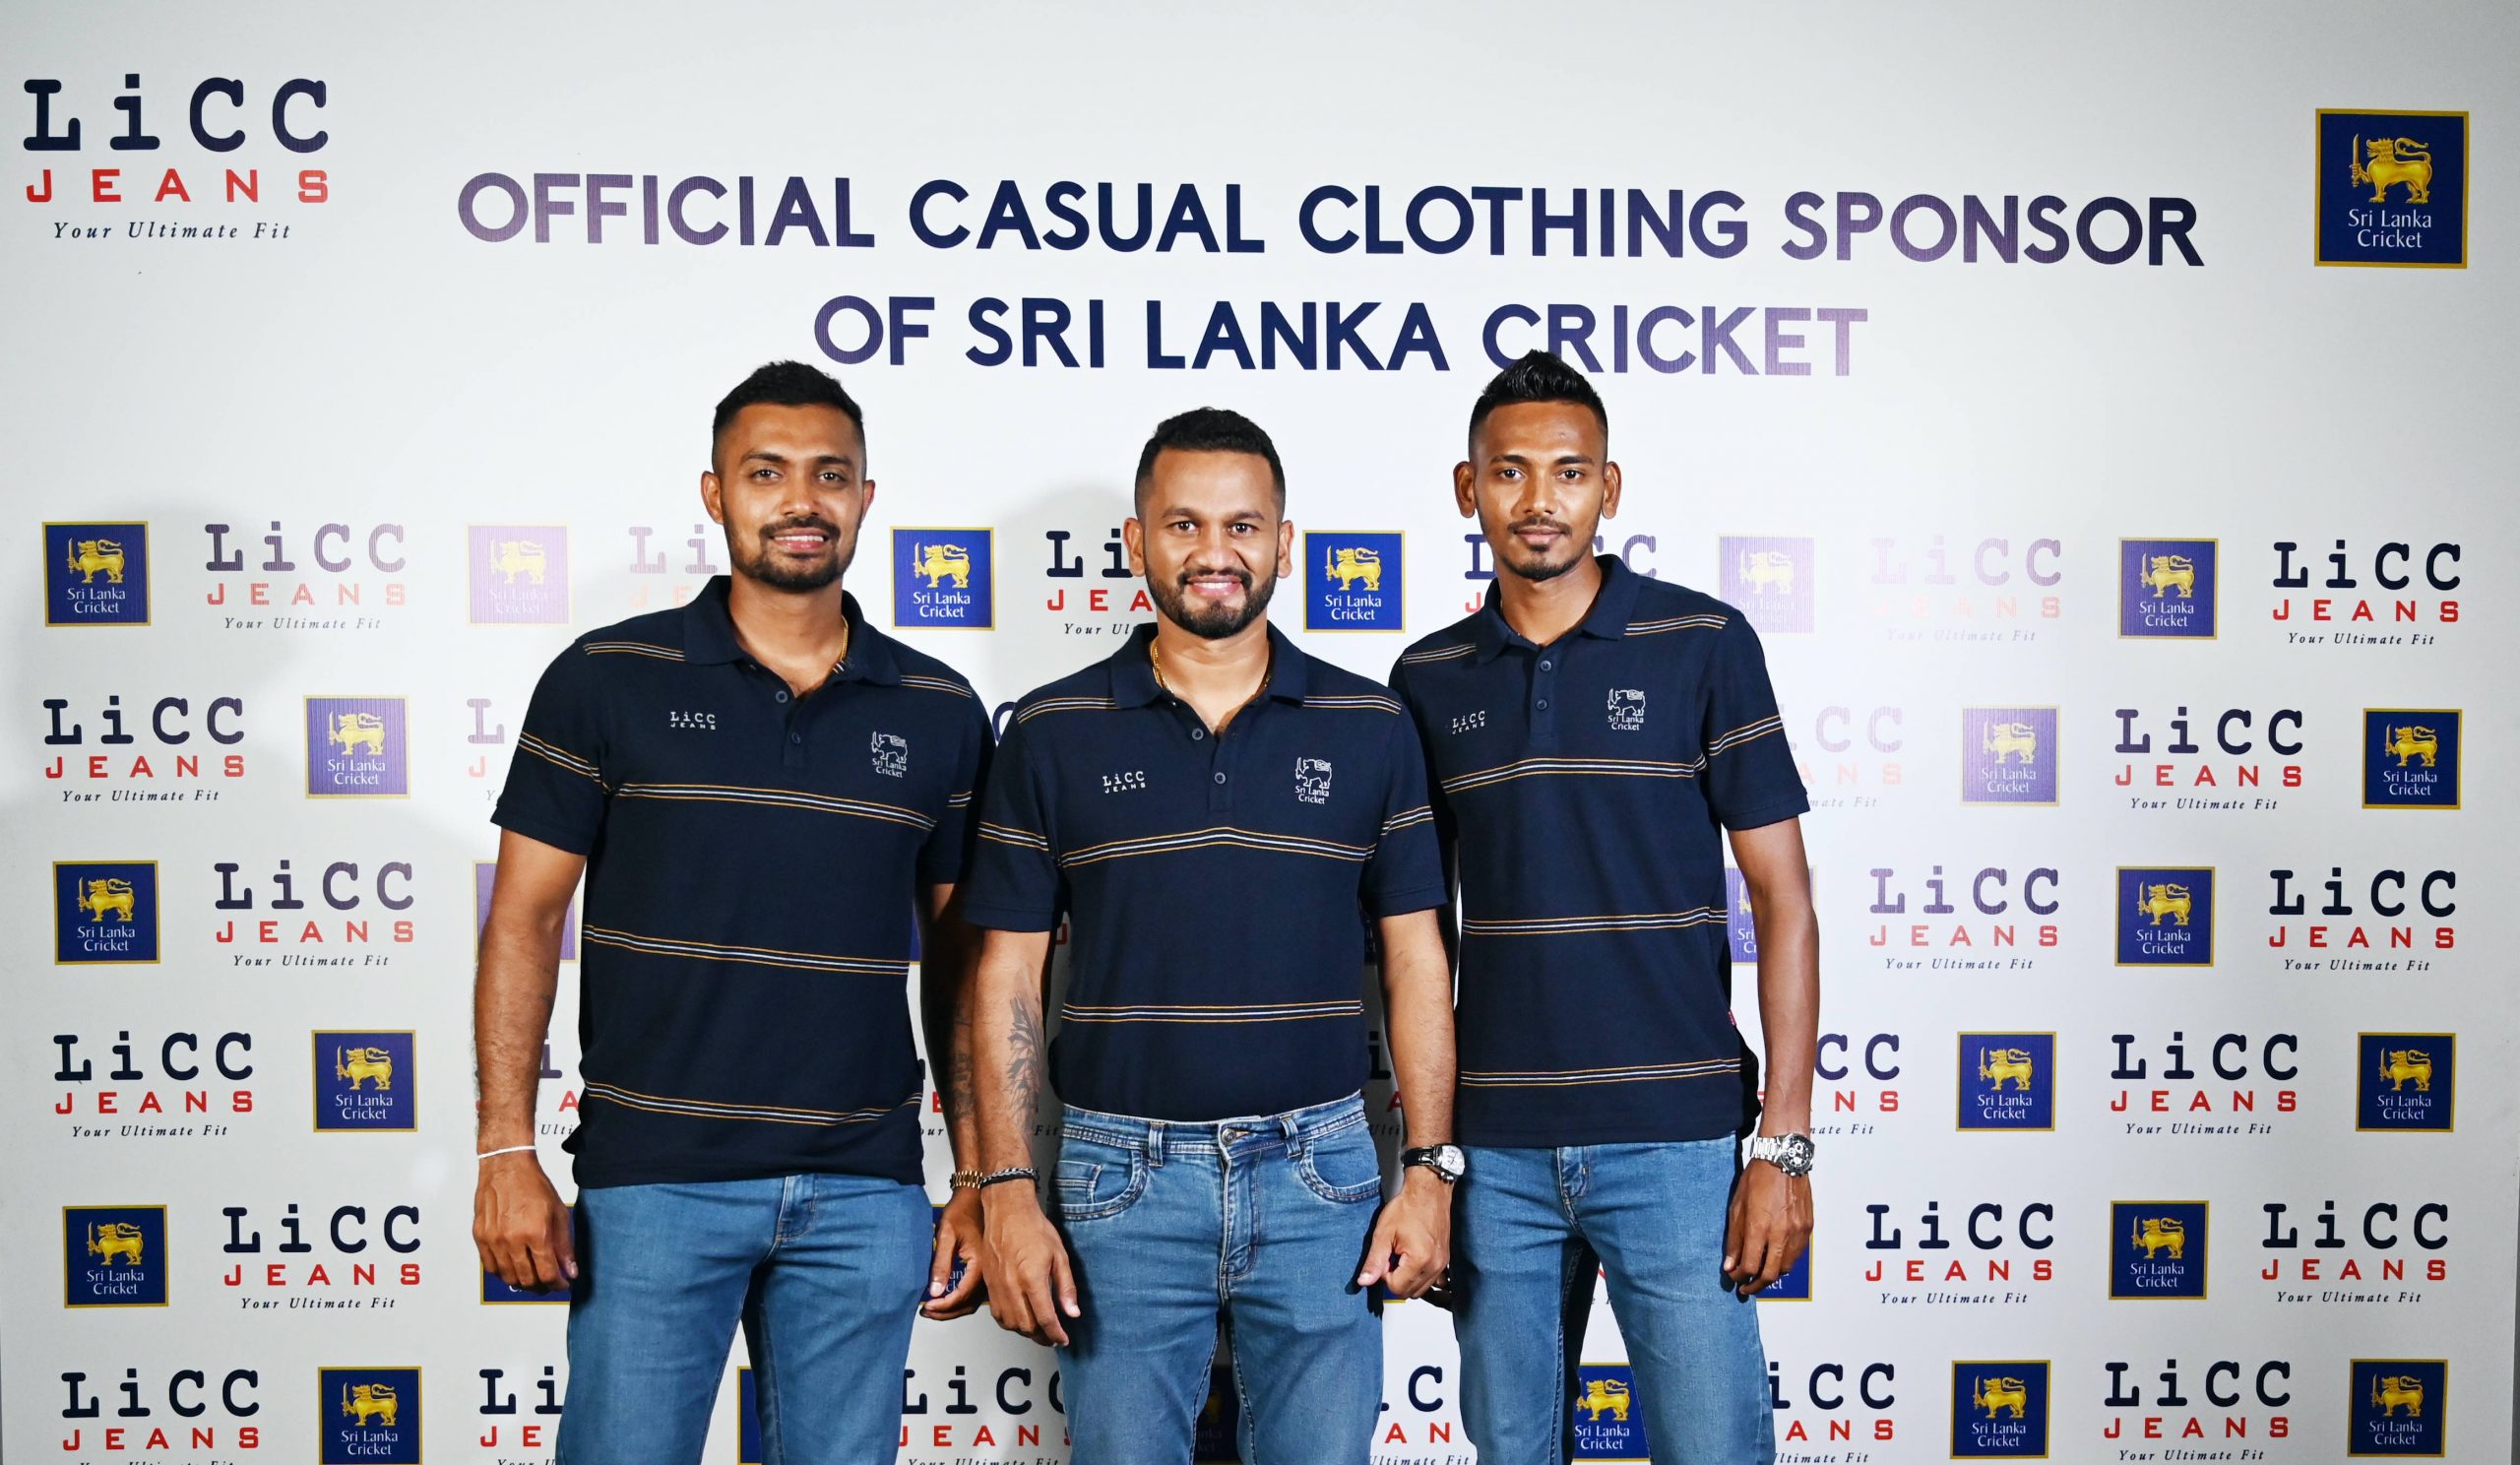 LiCC to continue as ‘Official Casual Clothing Sponsor of Sri Lanka Cricket’ for another three years